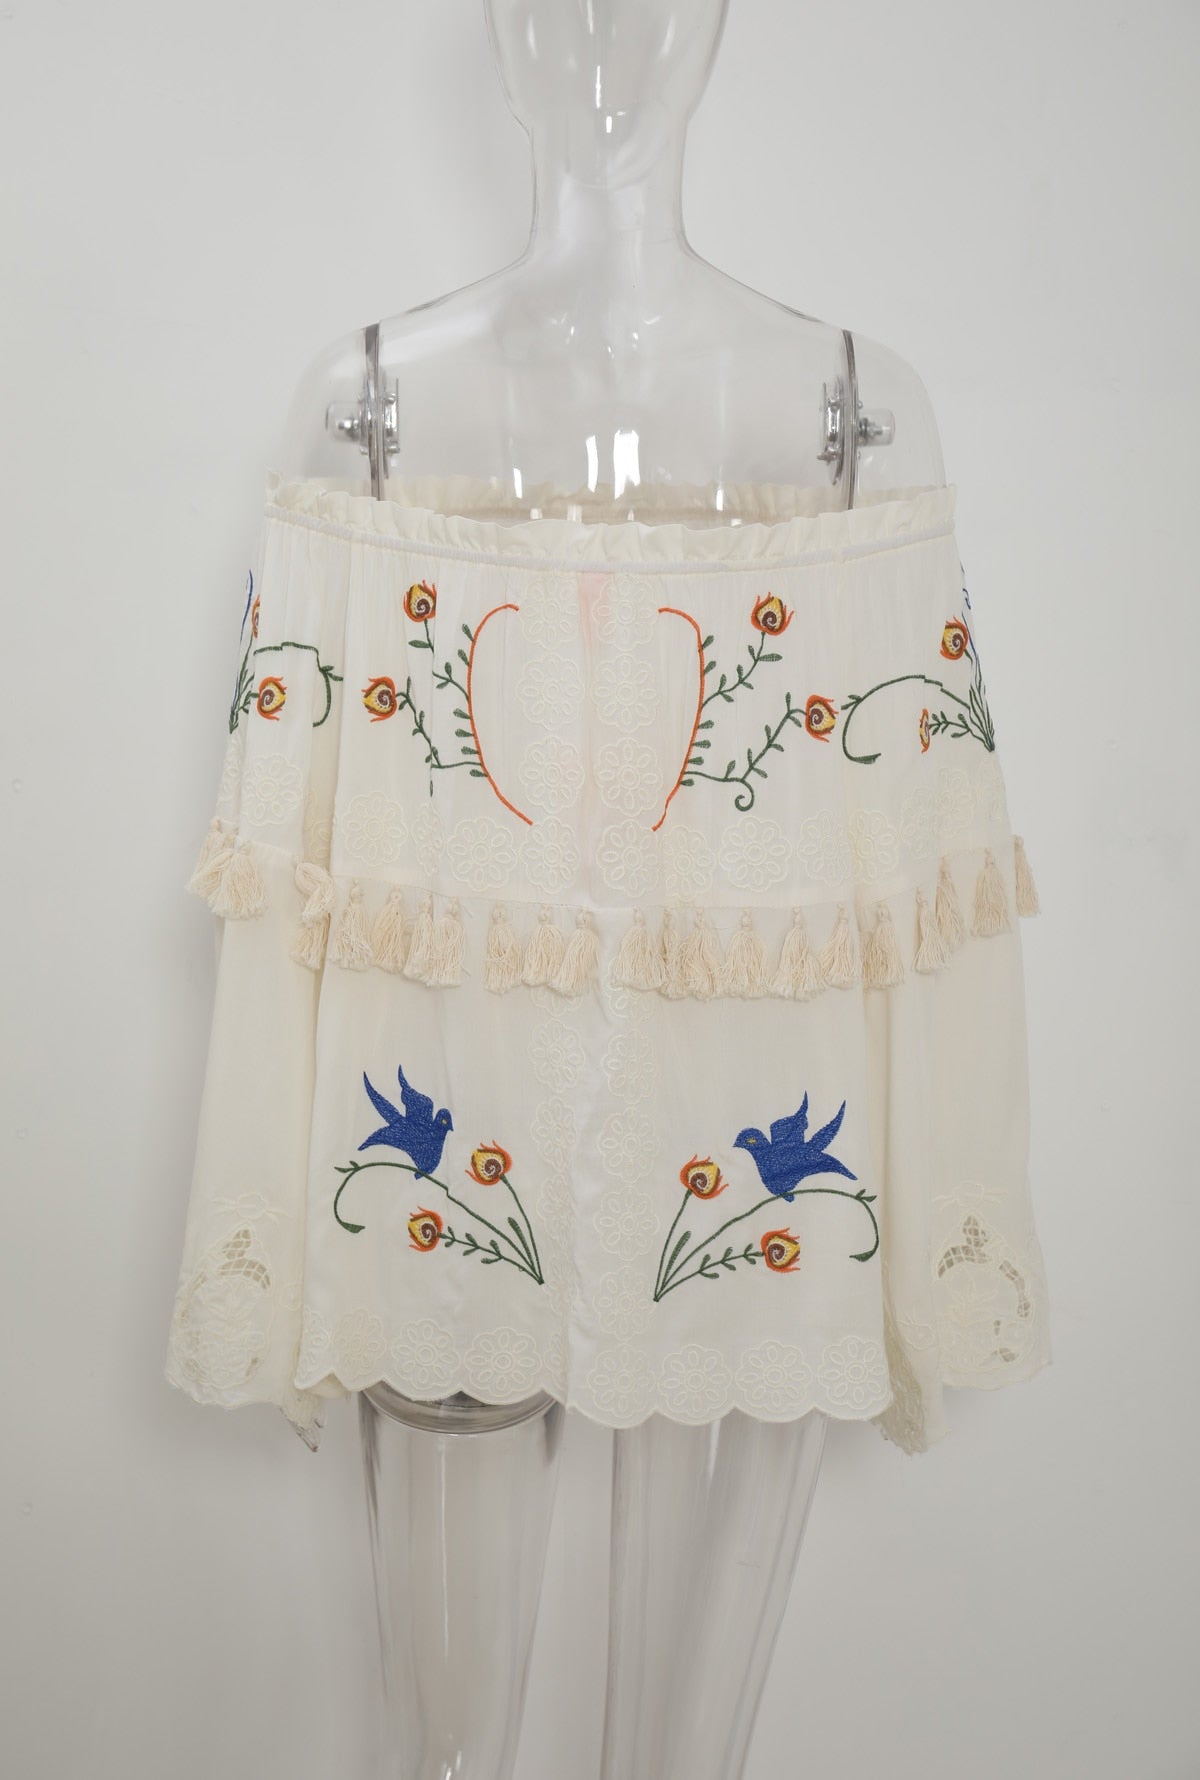 Chic White Vintage Embroidery Tassel blouse